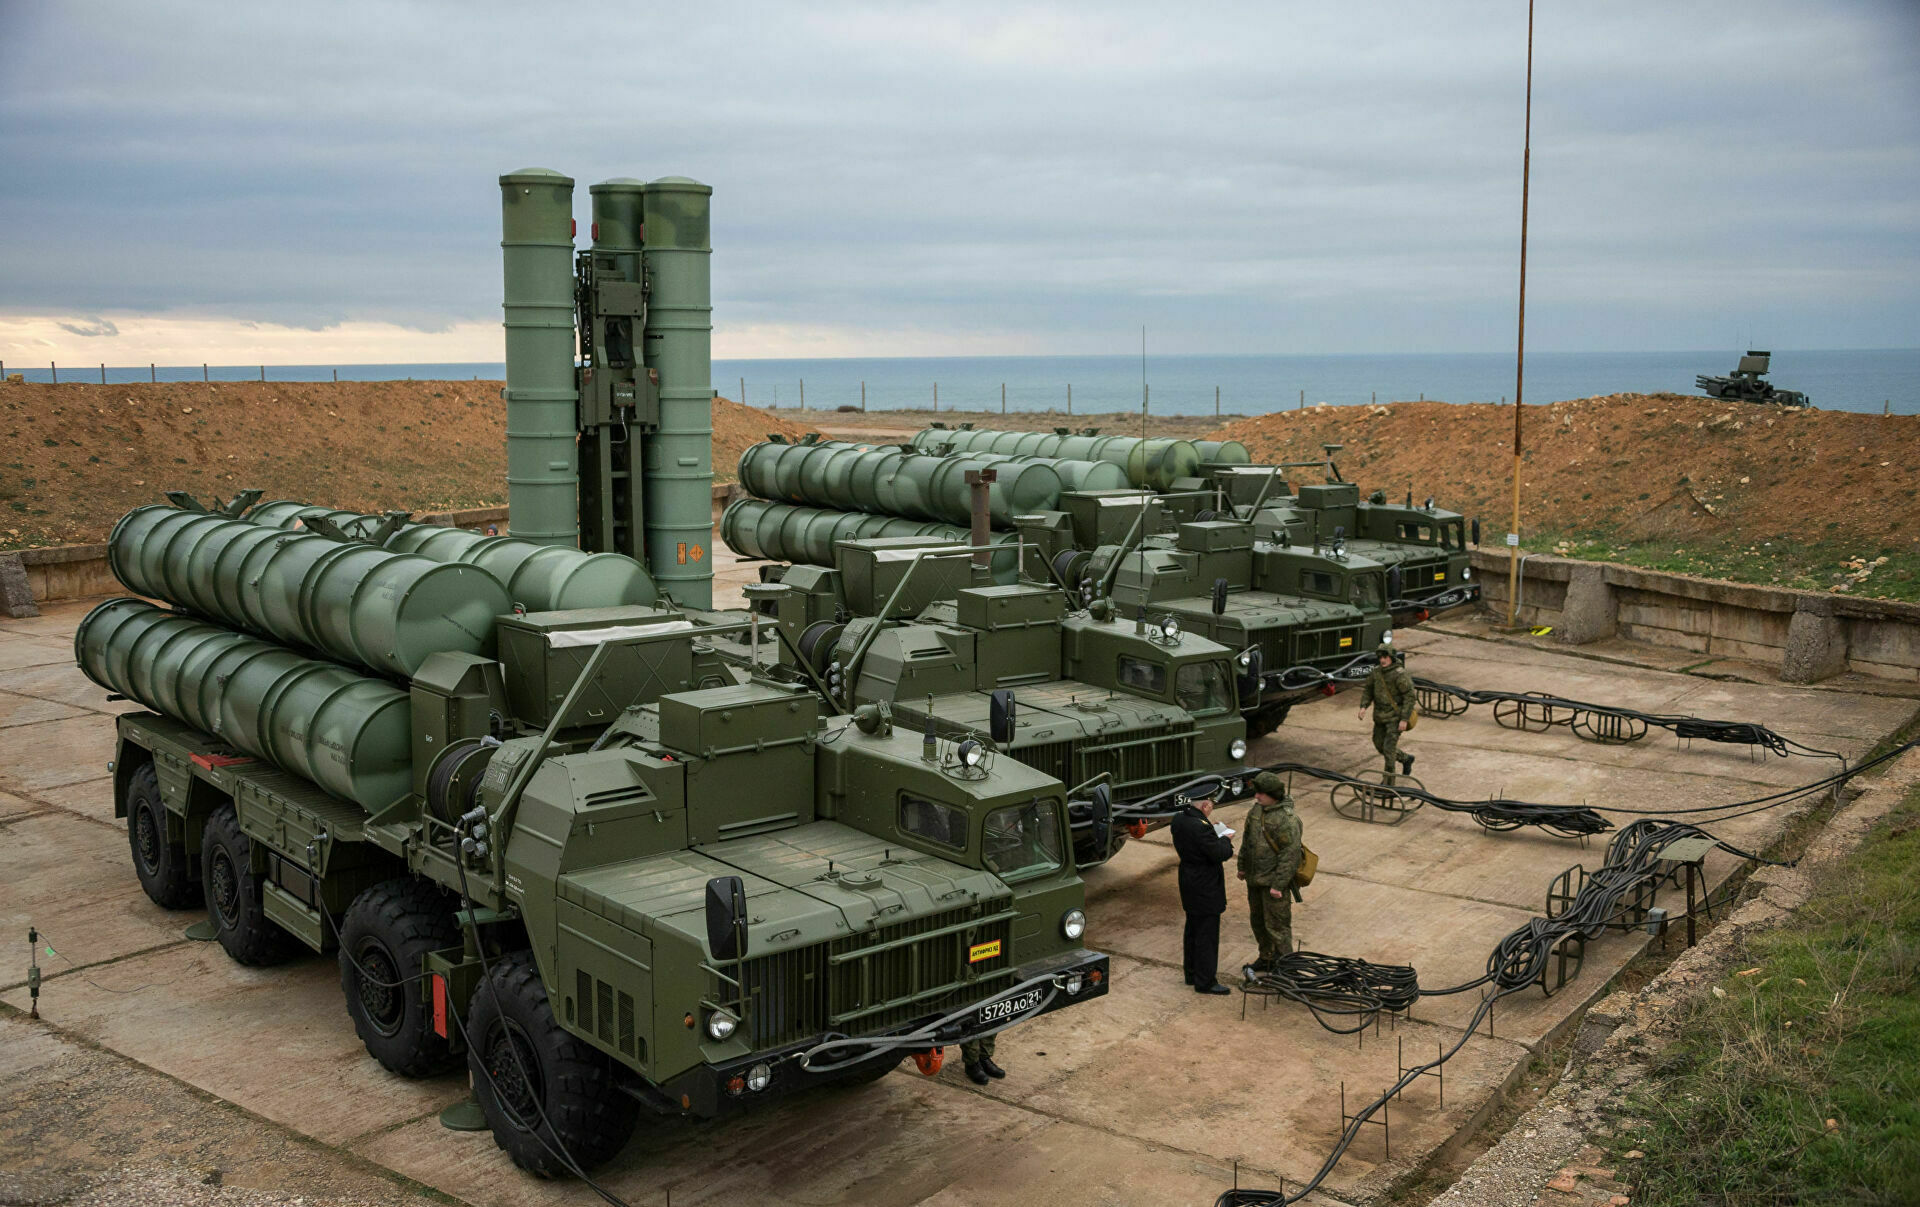 Two divisions of S-400 air defense missile systems were transferred from the Far East to Belarus